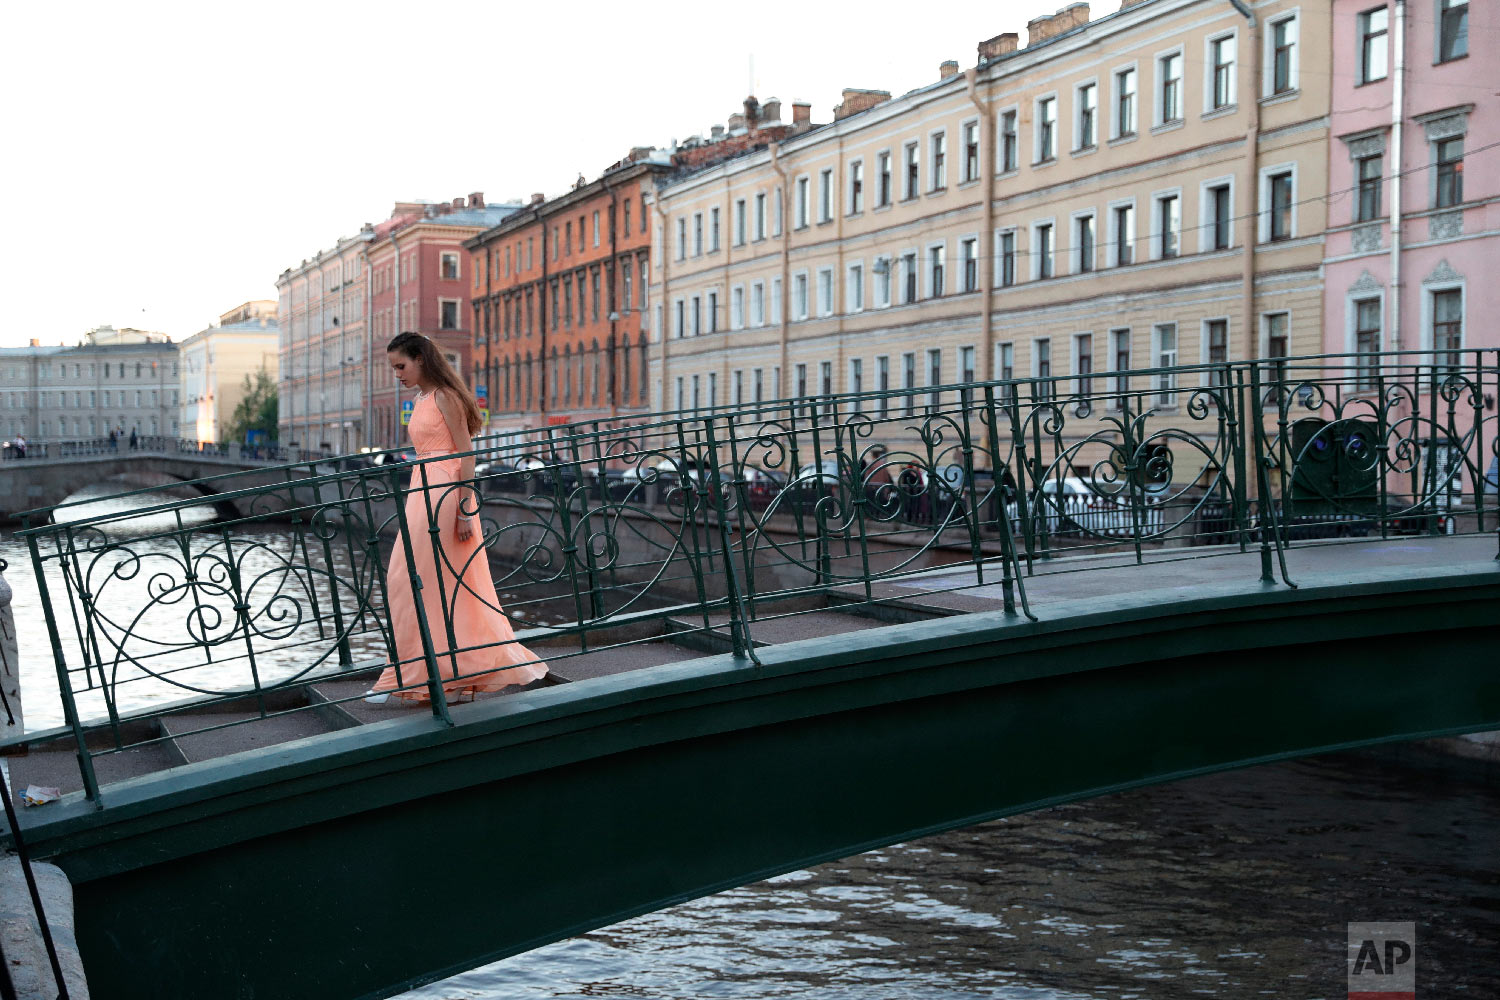  A woman crosses a bridge during the 2018 soccer World Cup in St. Petersburg, Russia on June 25, 2018. (AP Photo/Ricardo Mazalan) 